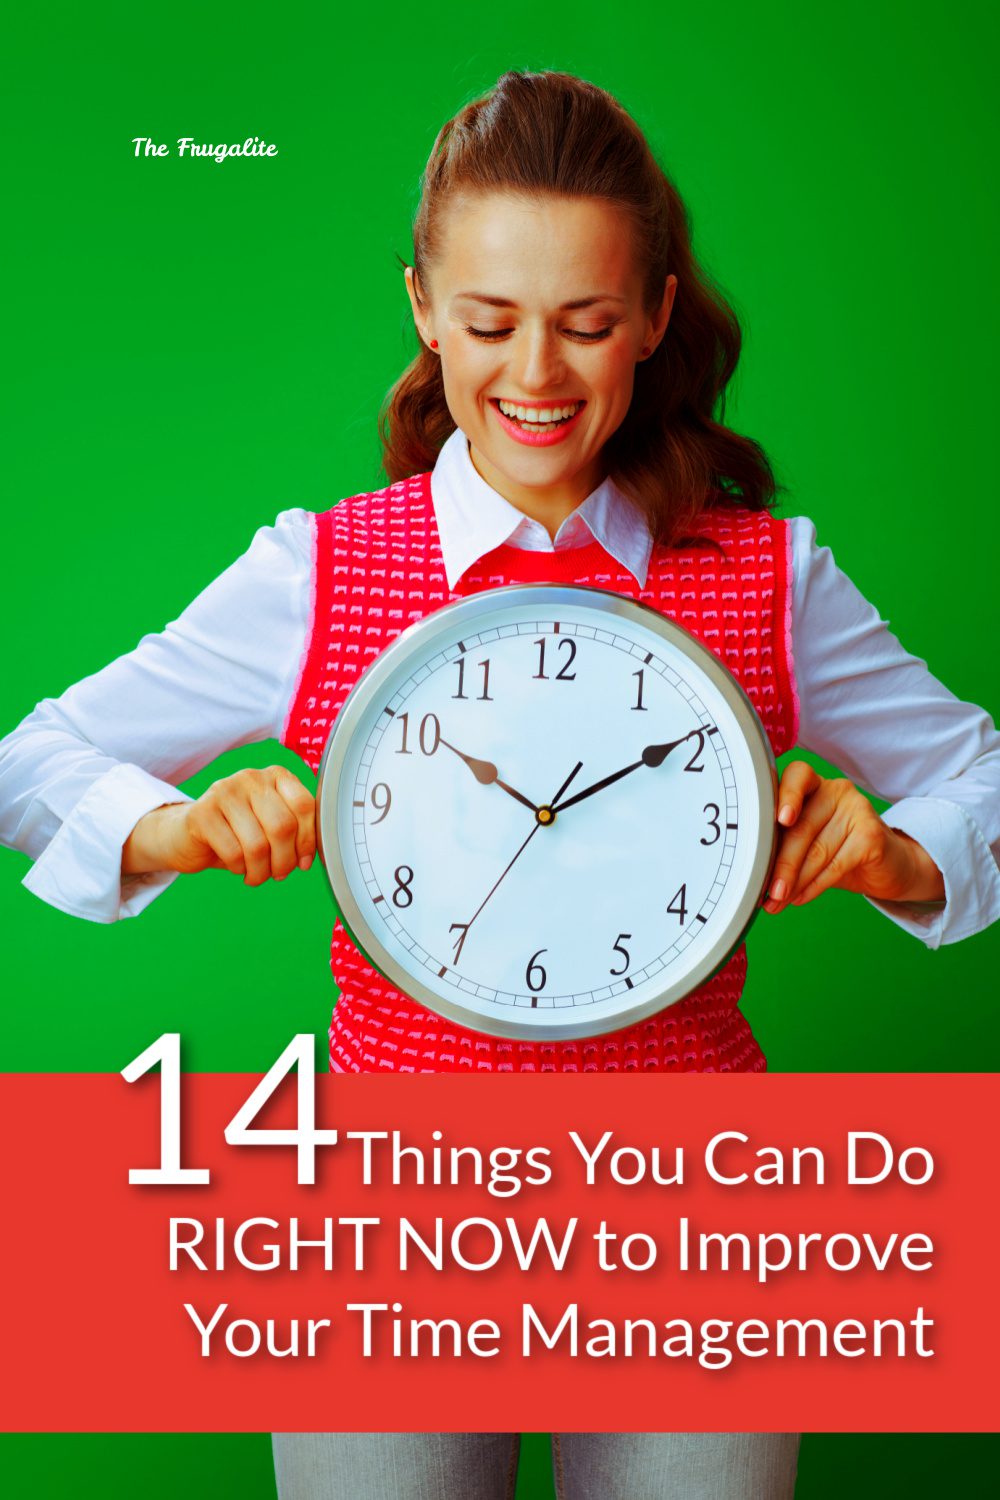 14 Things You Can Do RIGHT NOW to Improve Your Time Management